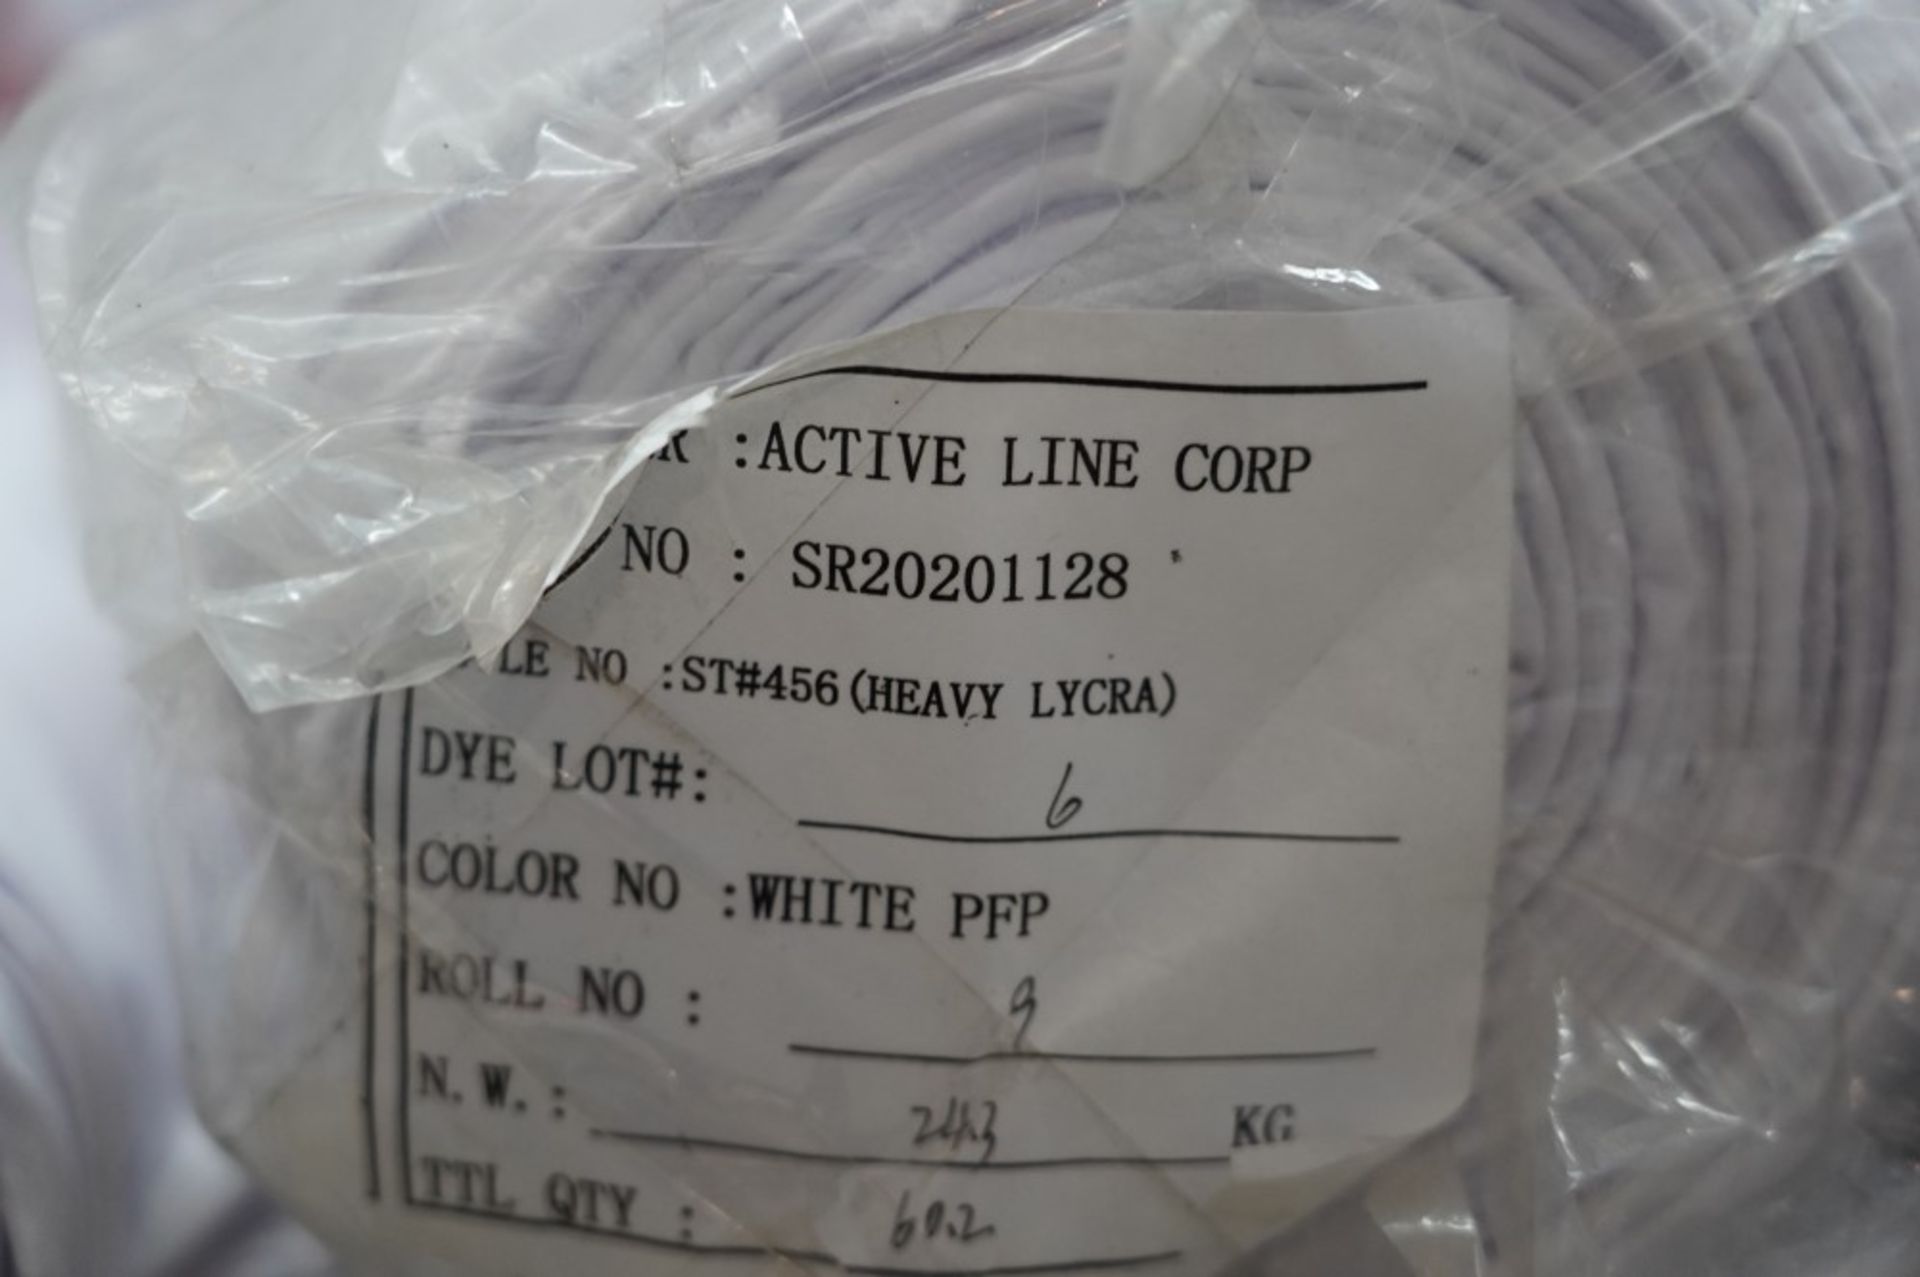 Active Line Corp (33) Heavy Lycra Fabric Rolls Model 458, White, PFP - Image 4 of 4